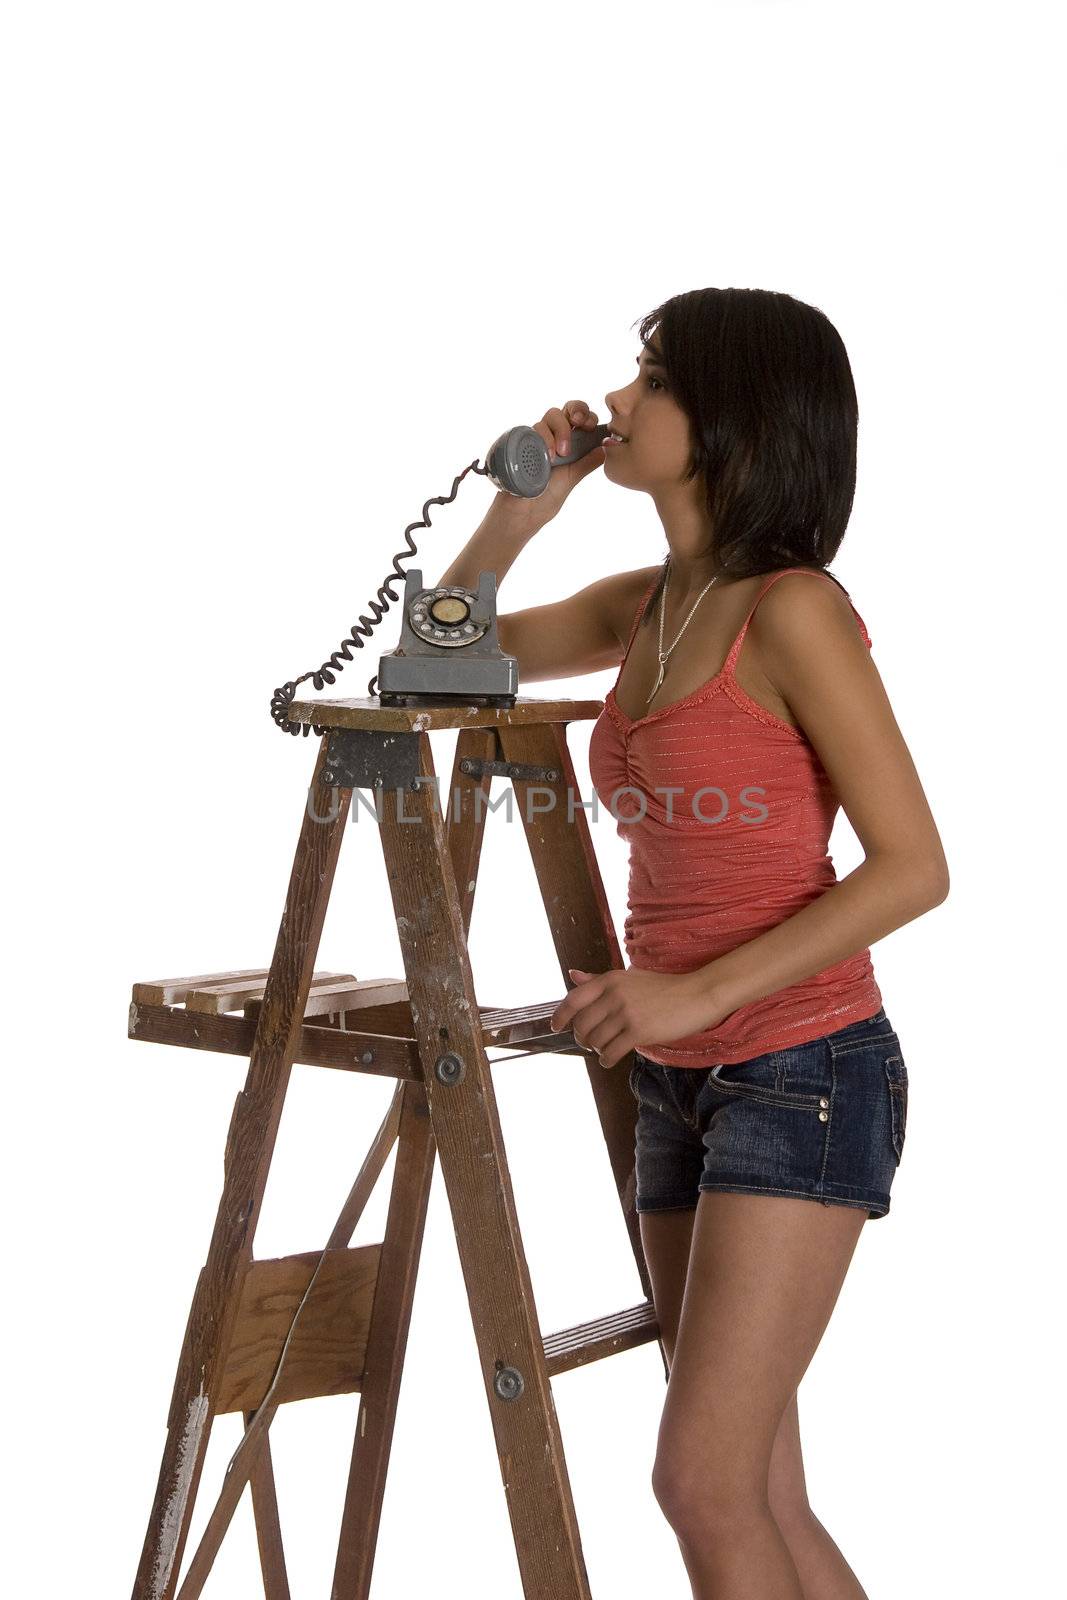 teenage girl standing on ladder talking on a old rotary phone